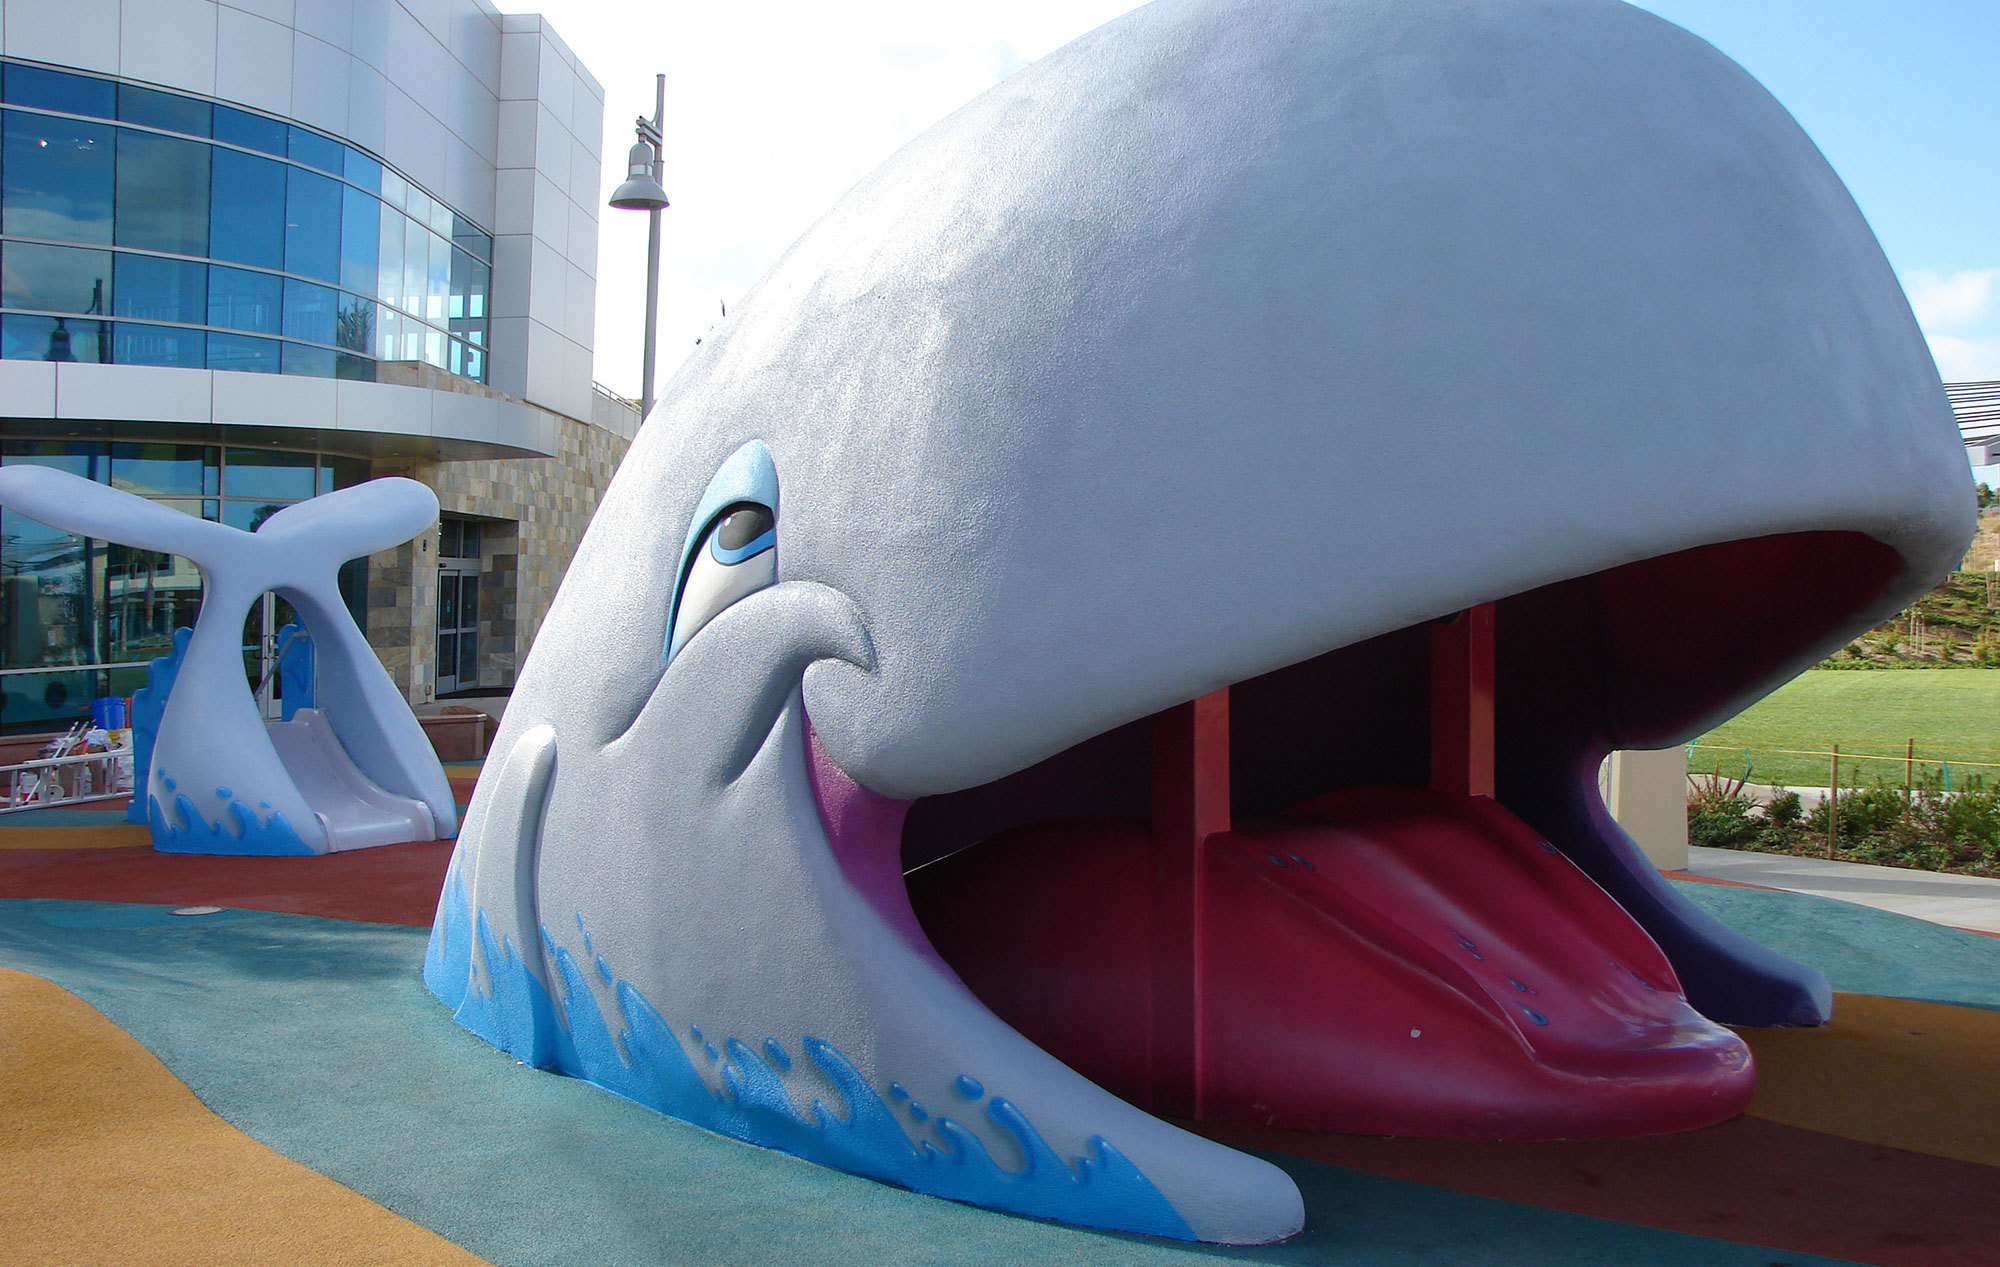 Outdoor Giant 3D sculpted Whale Shaped Slide